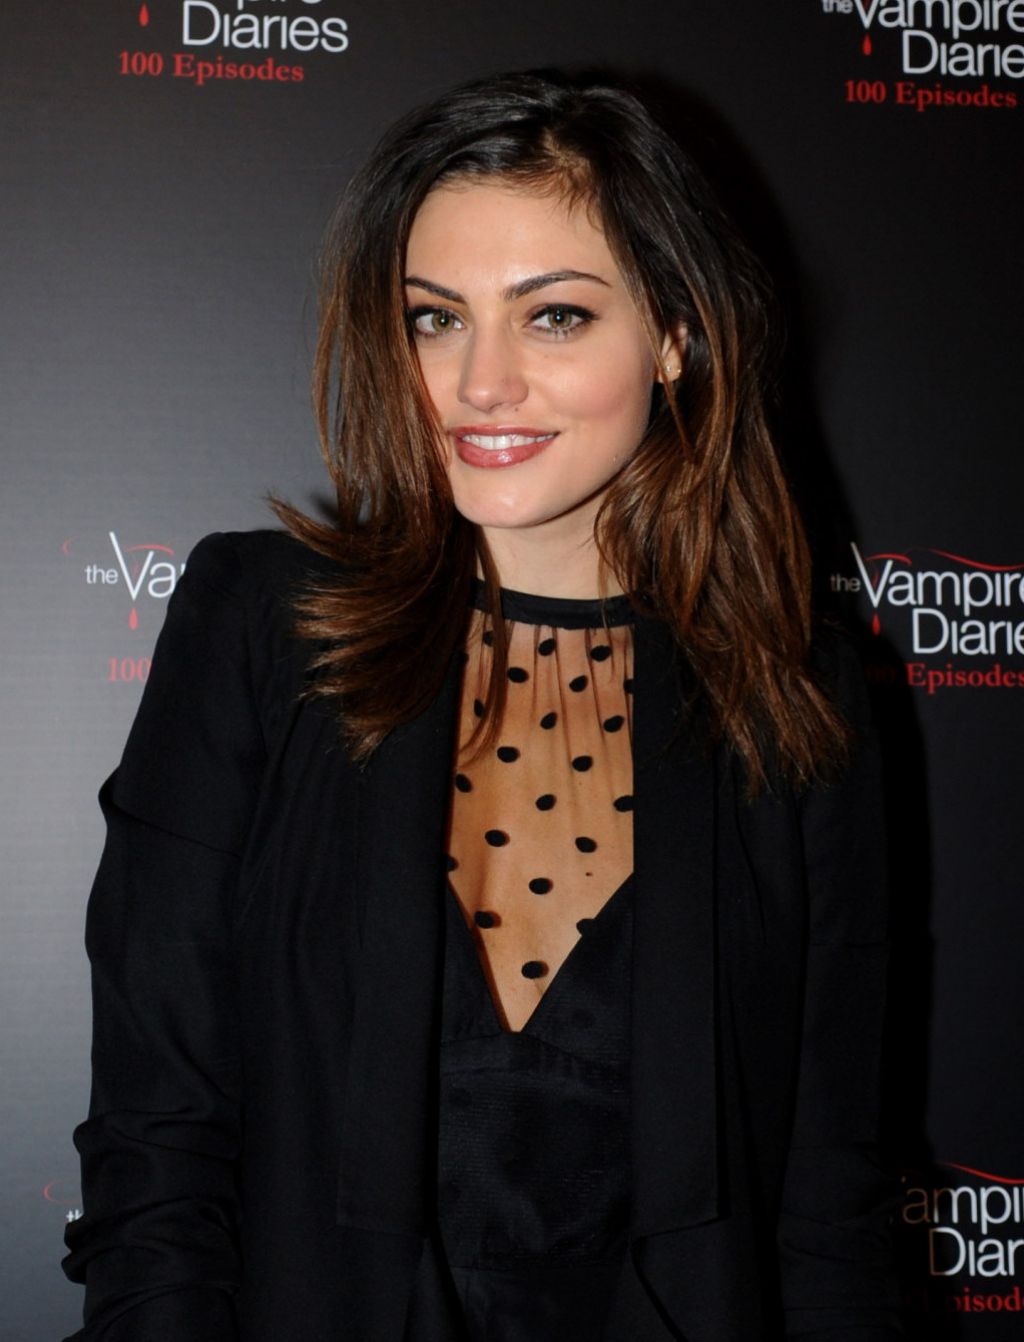 Phoebe Tonkin Attends The Vampire Diaries 100th Episode Celebration